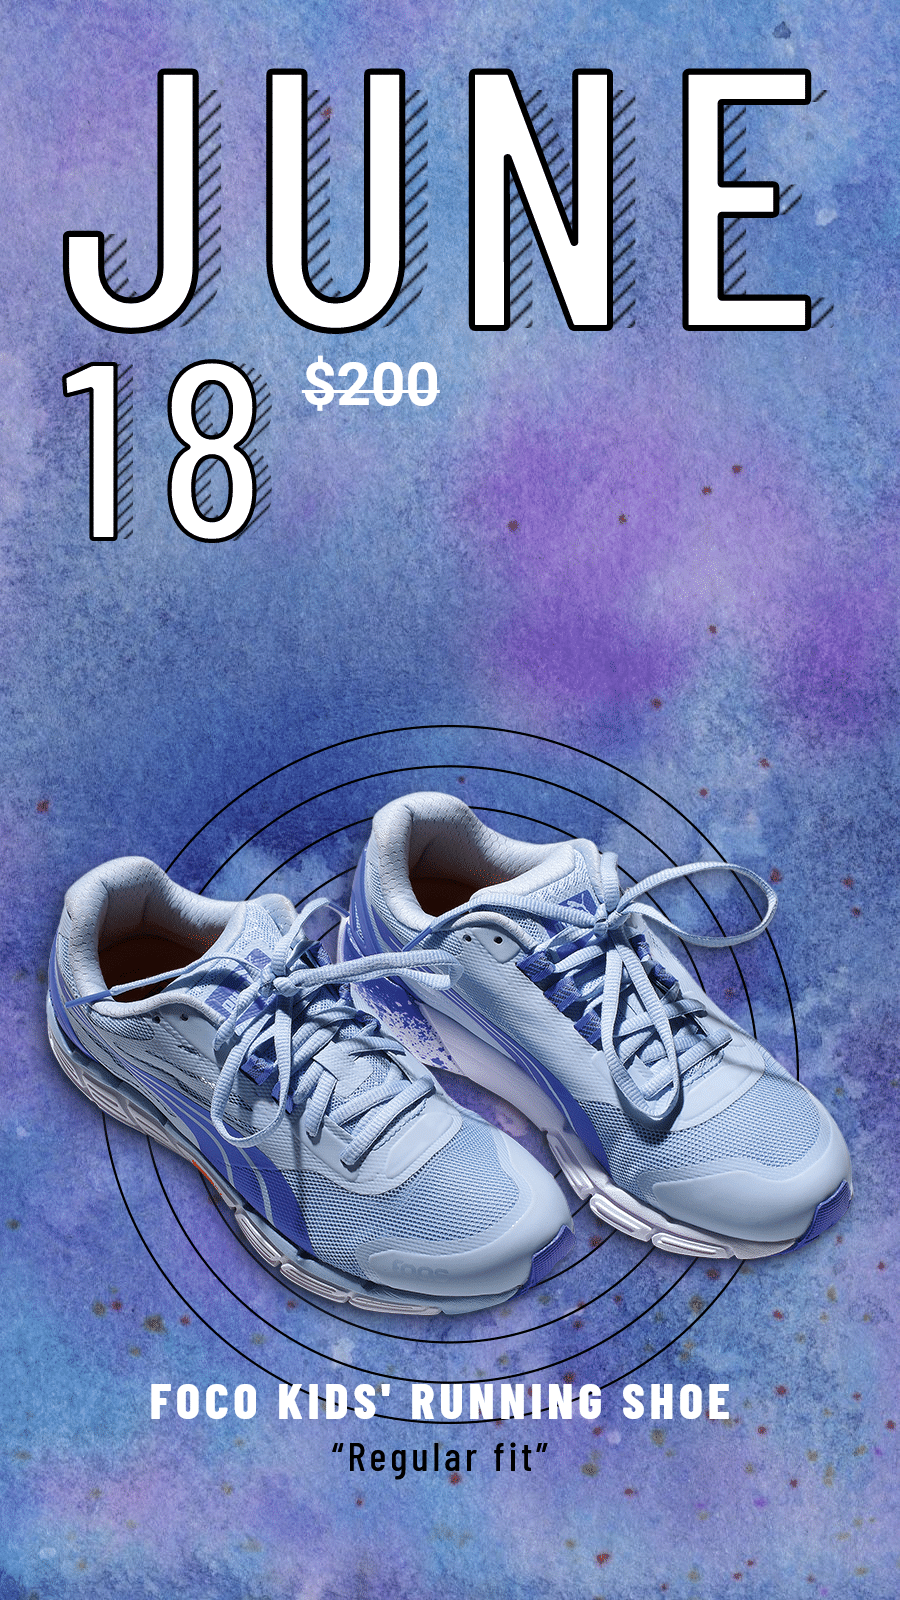 Watercolor Effect Sports Running Shoes Promotion Ecommerce Story预览效果